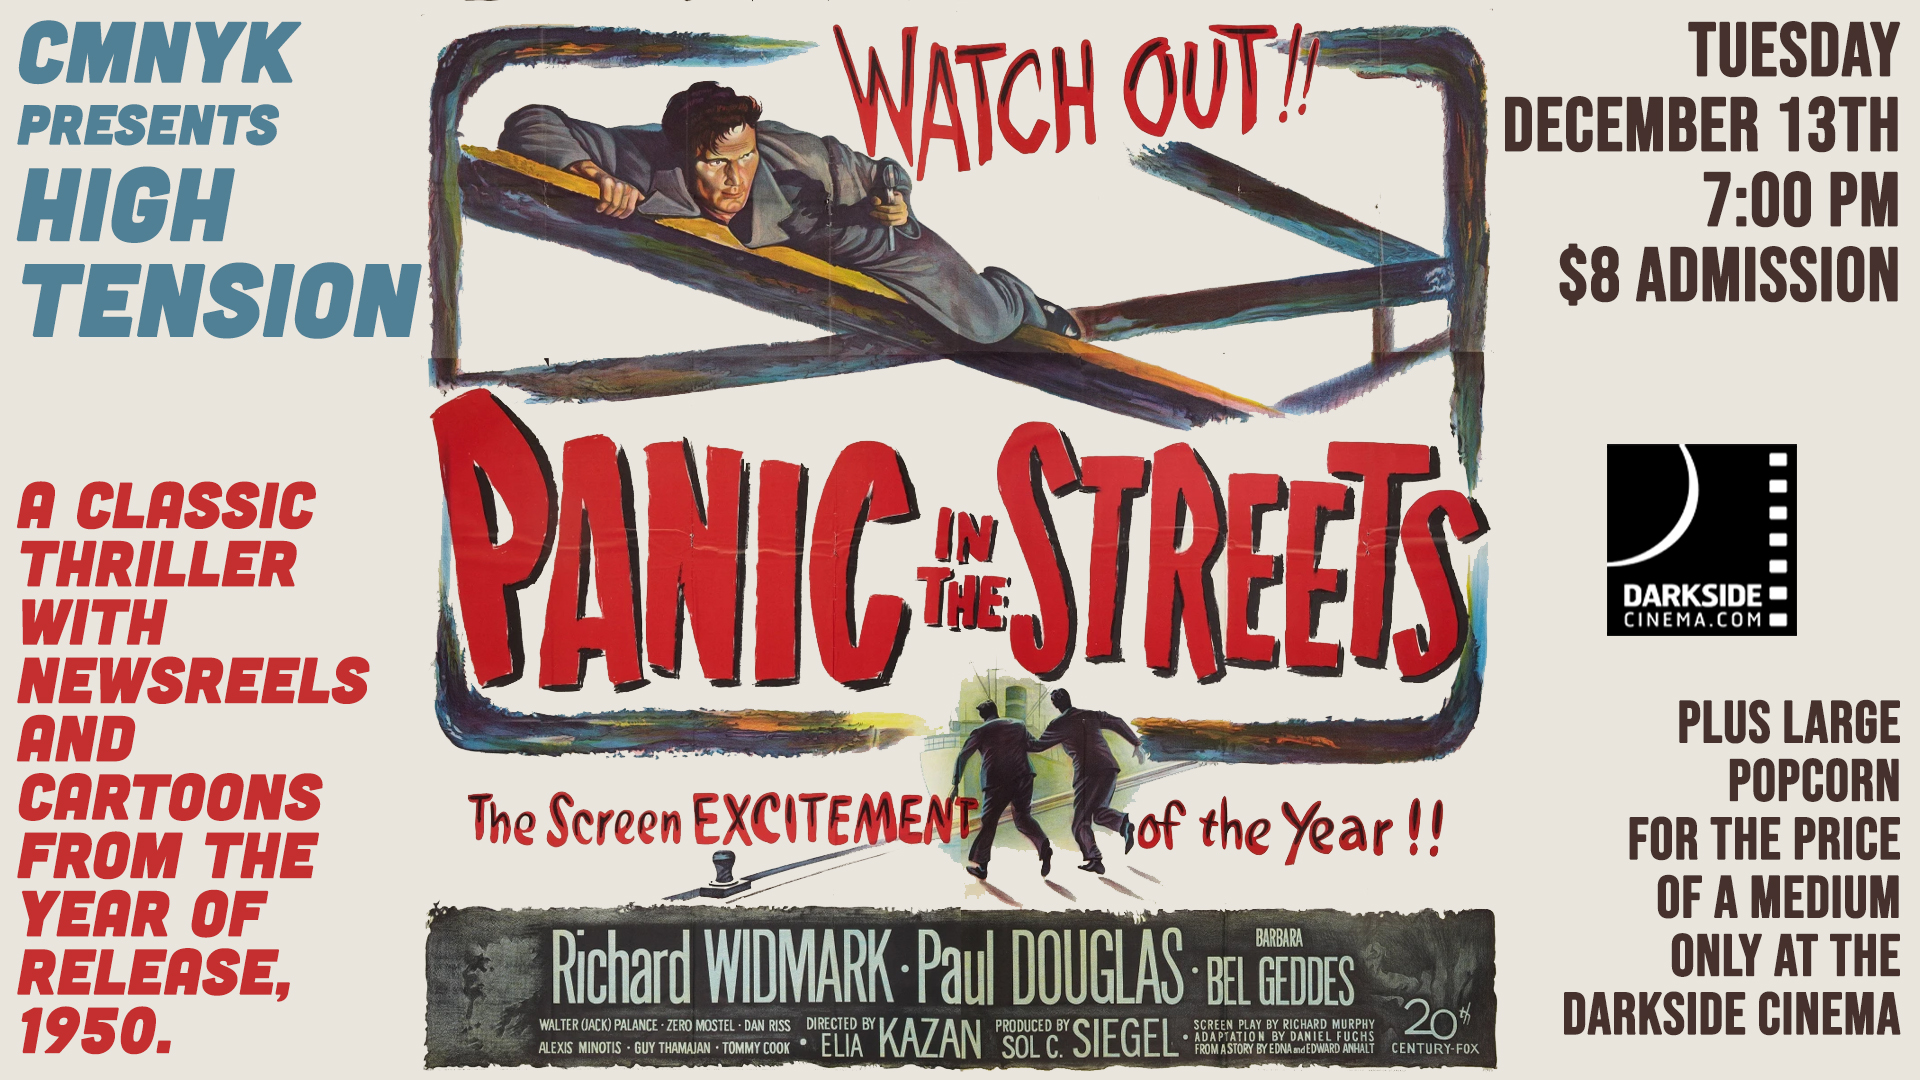 PANIC IN THE STREETS